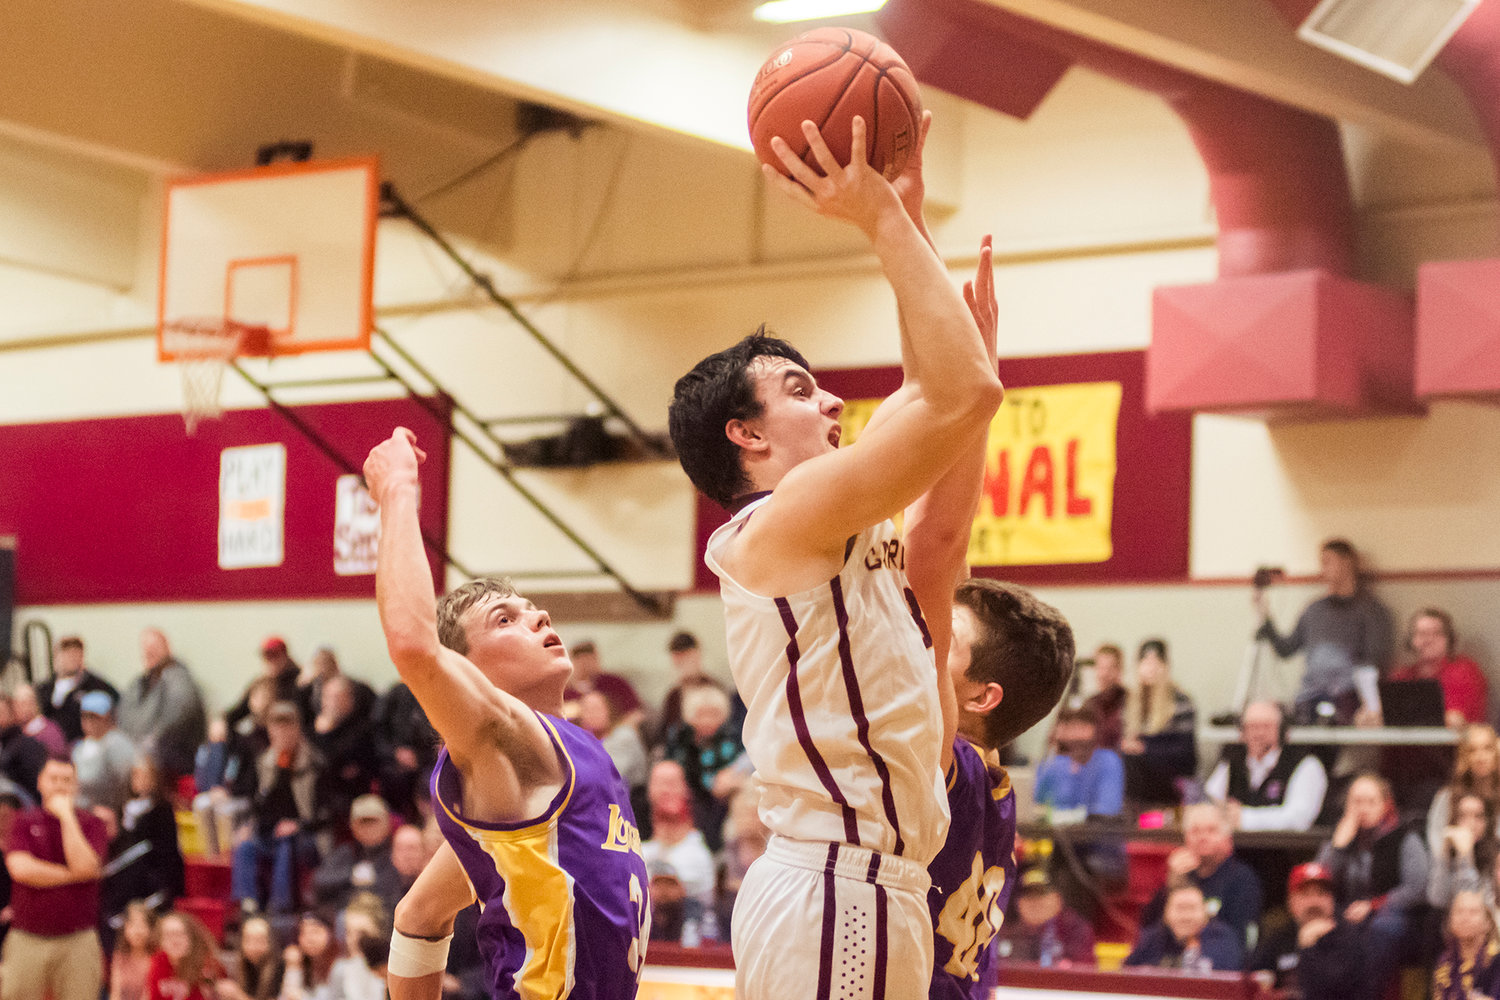 Cardinal's Bryce Cline (3) goes up for a shot Wednesday night at Winlock High School.